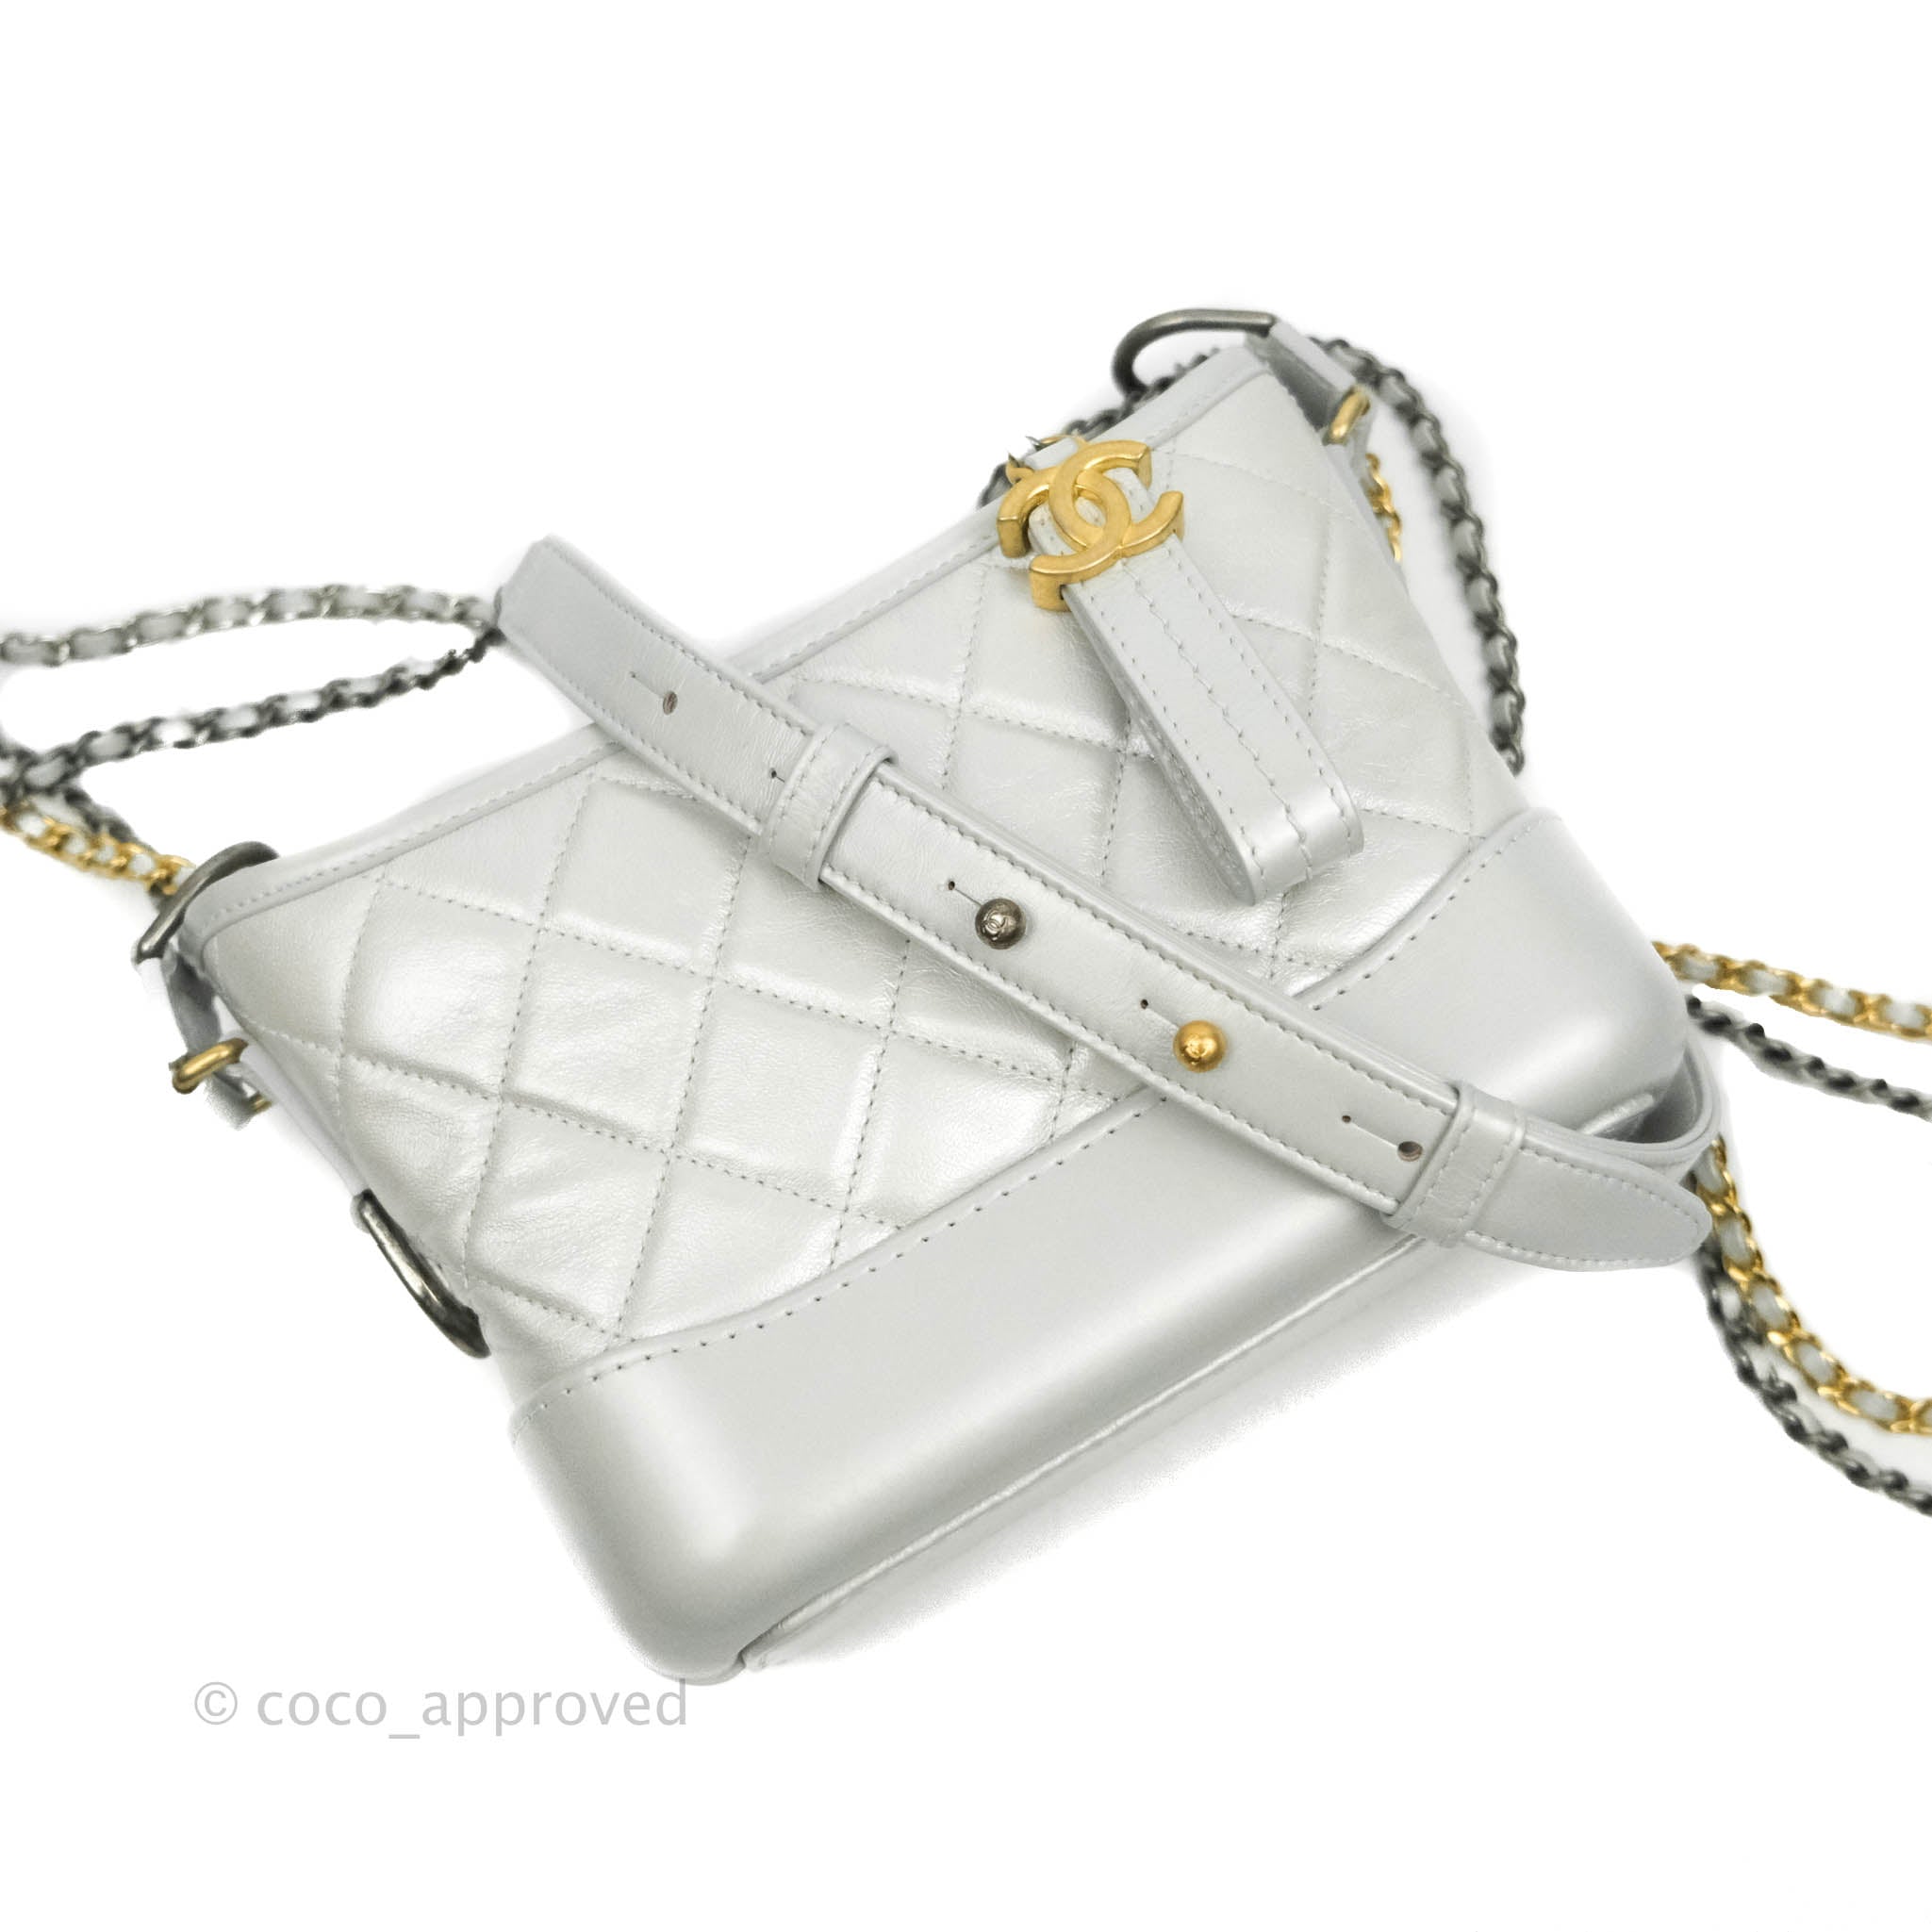 Chanel Quilted Small Gabrielle Hobo